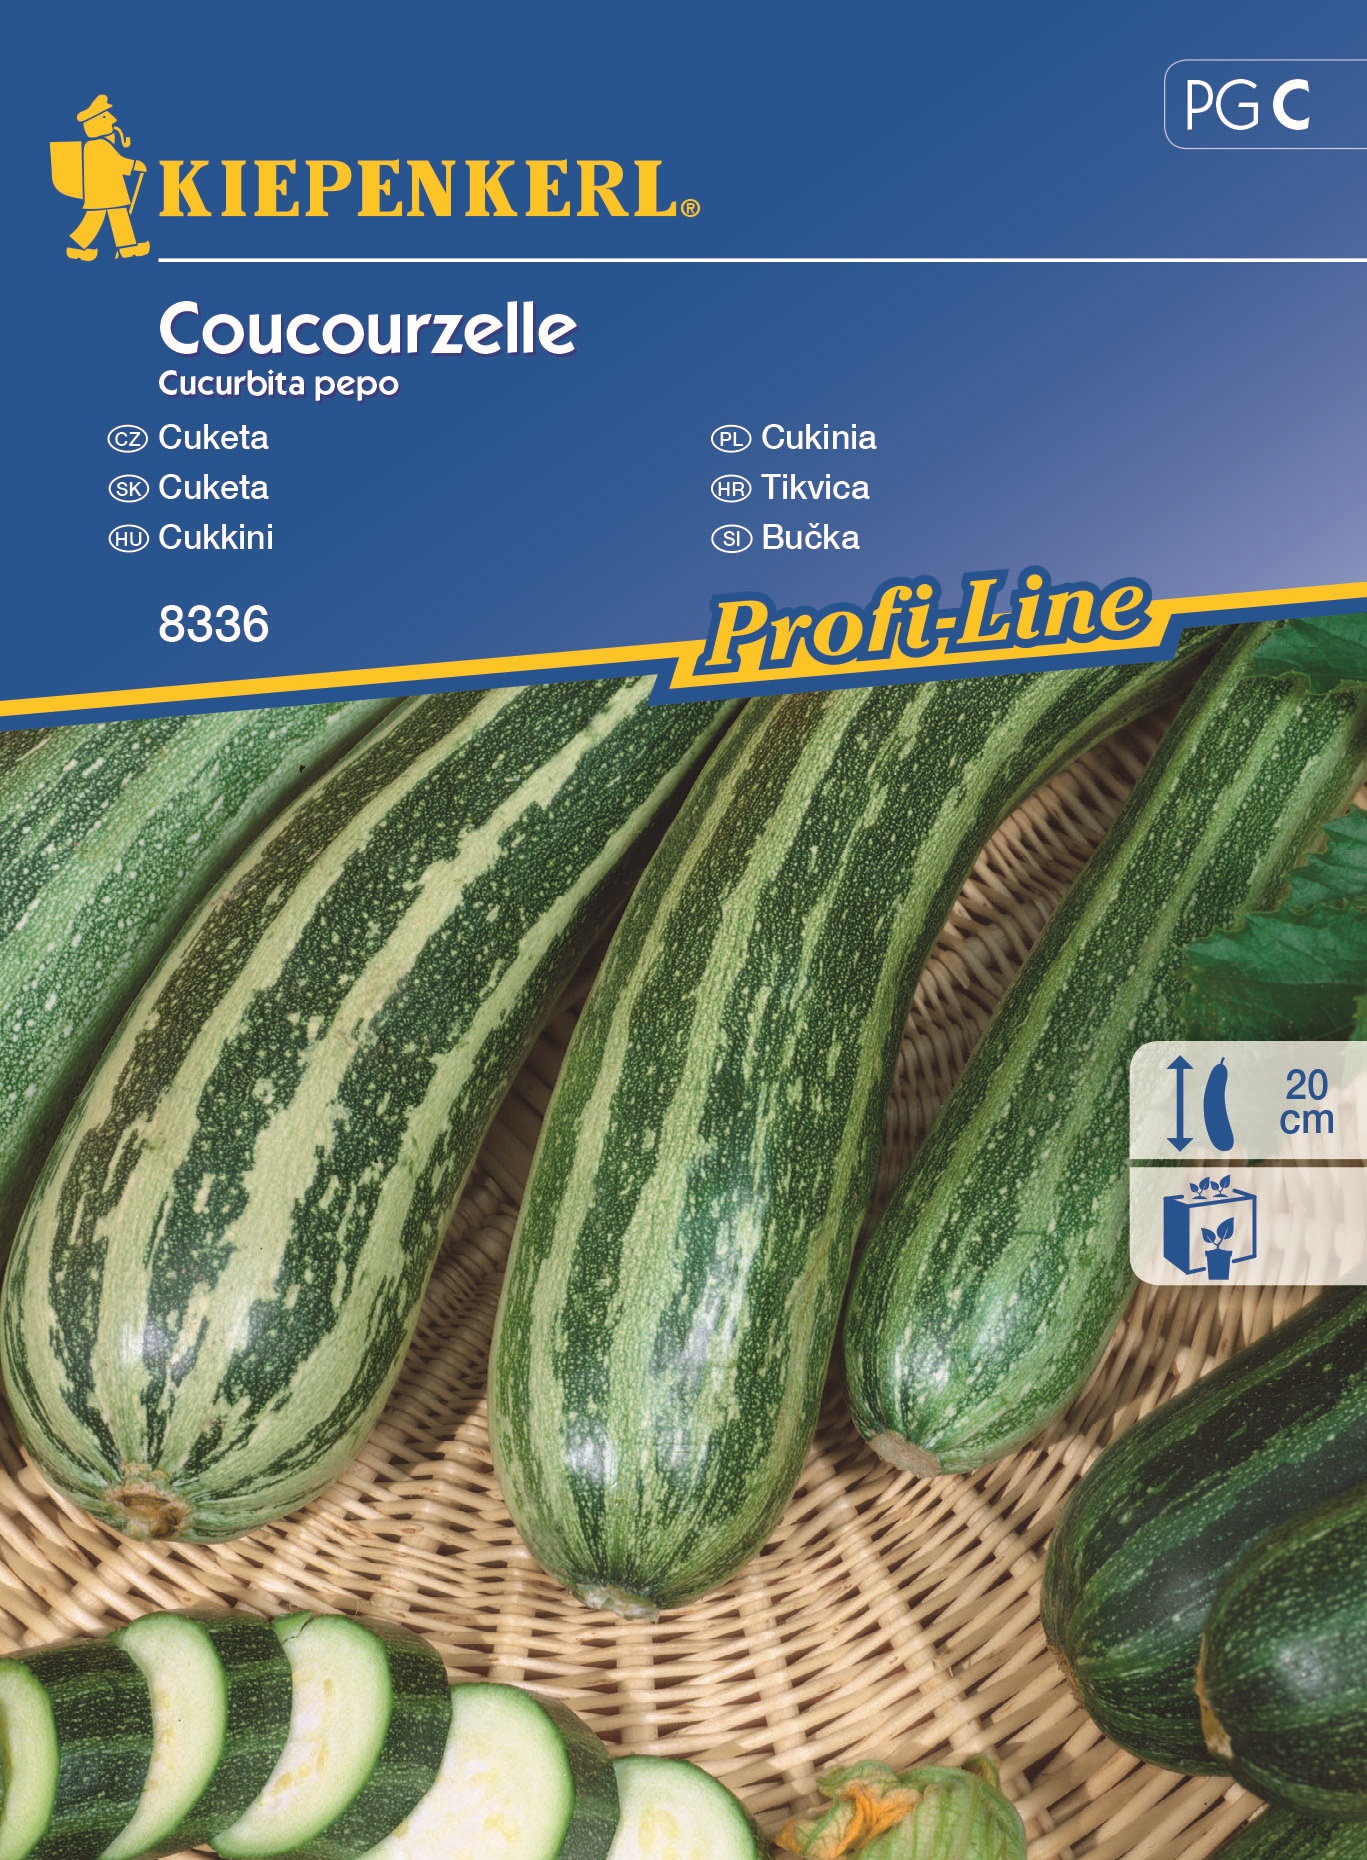 Courgette Coucourzelle min. 8 seeds Kipenkerl